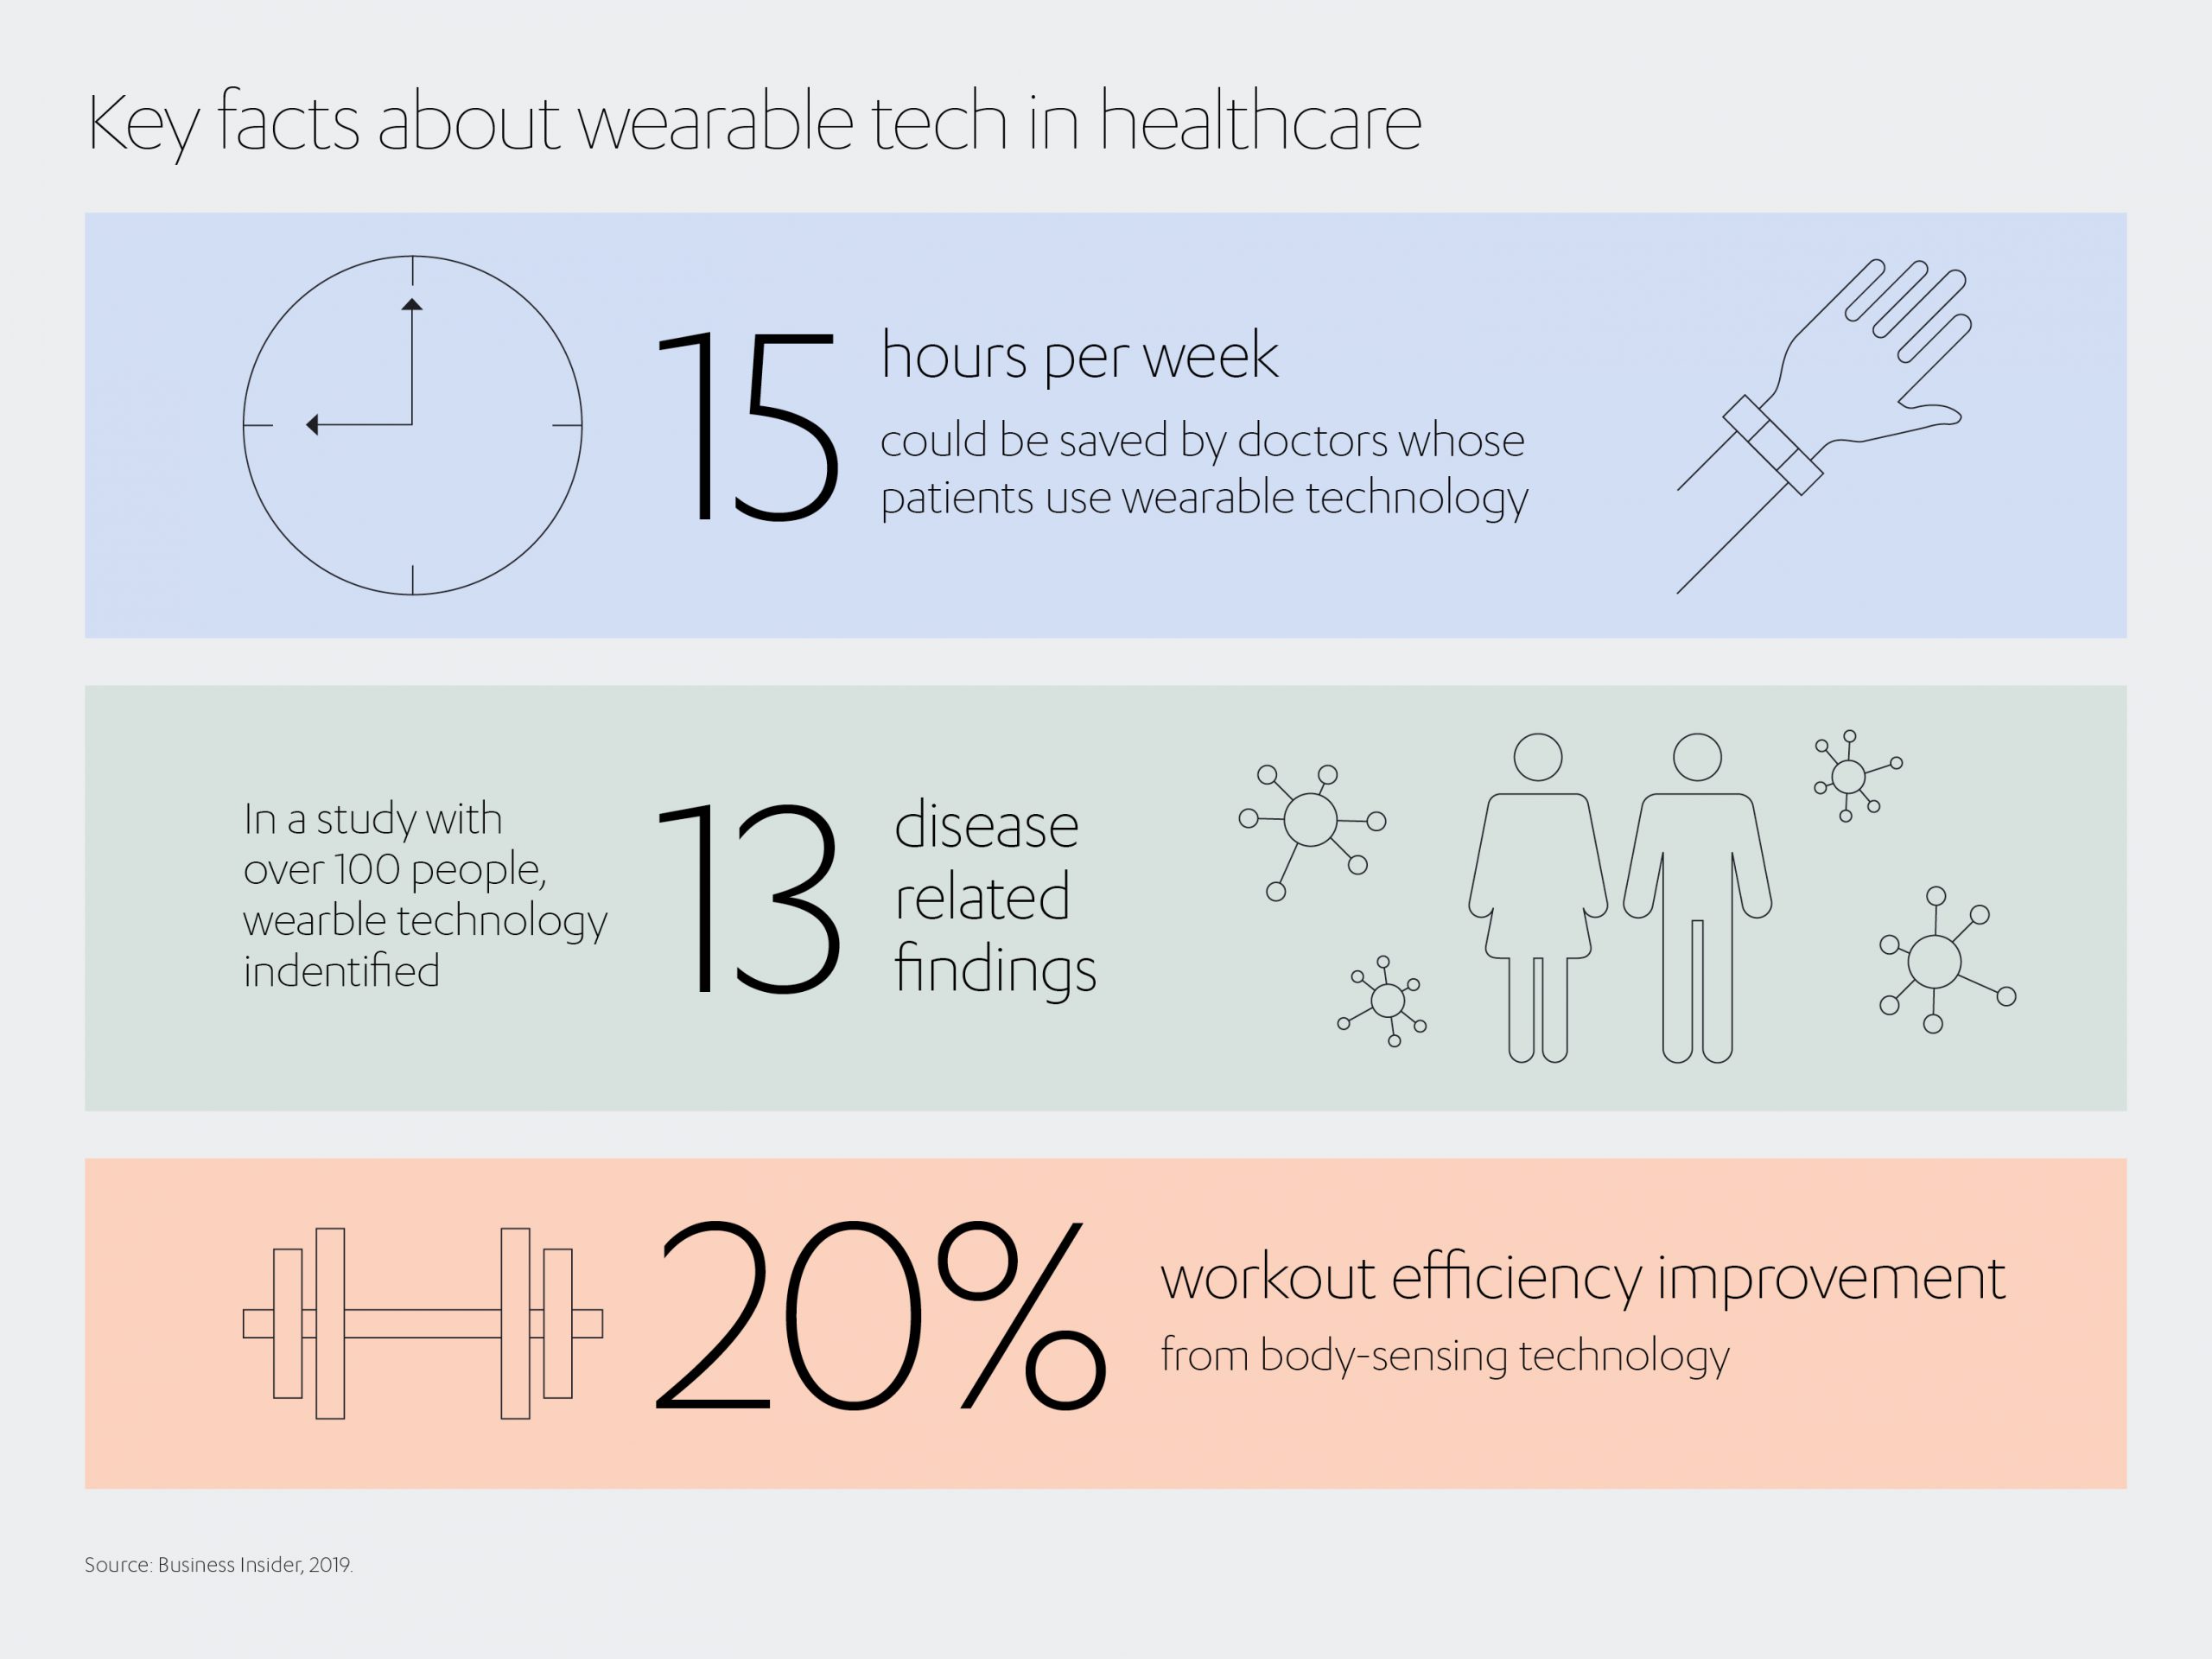 Key Facts About Wearable Tech in Healthcare